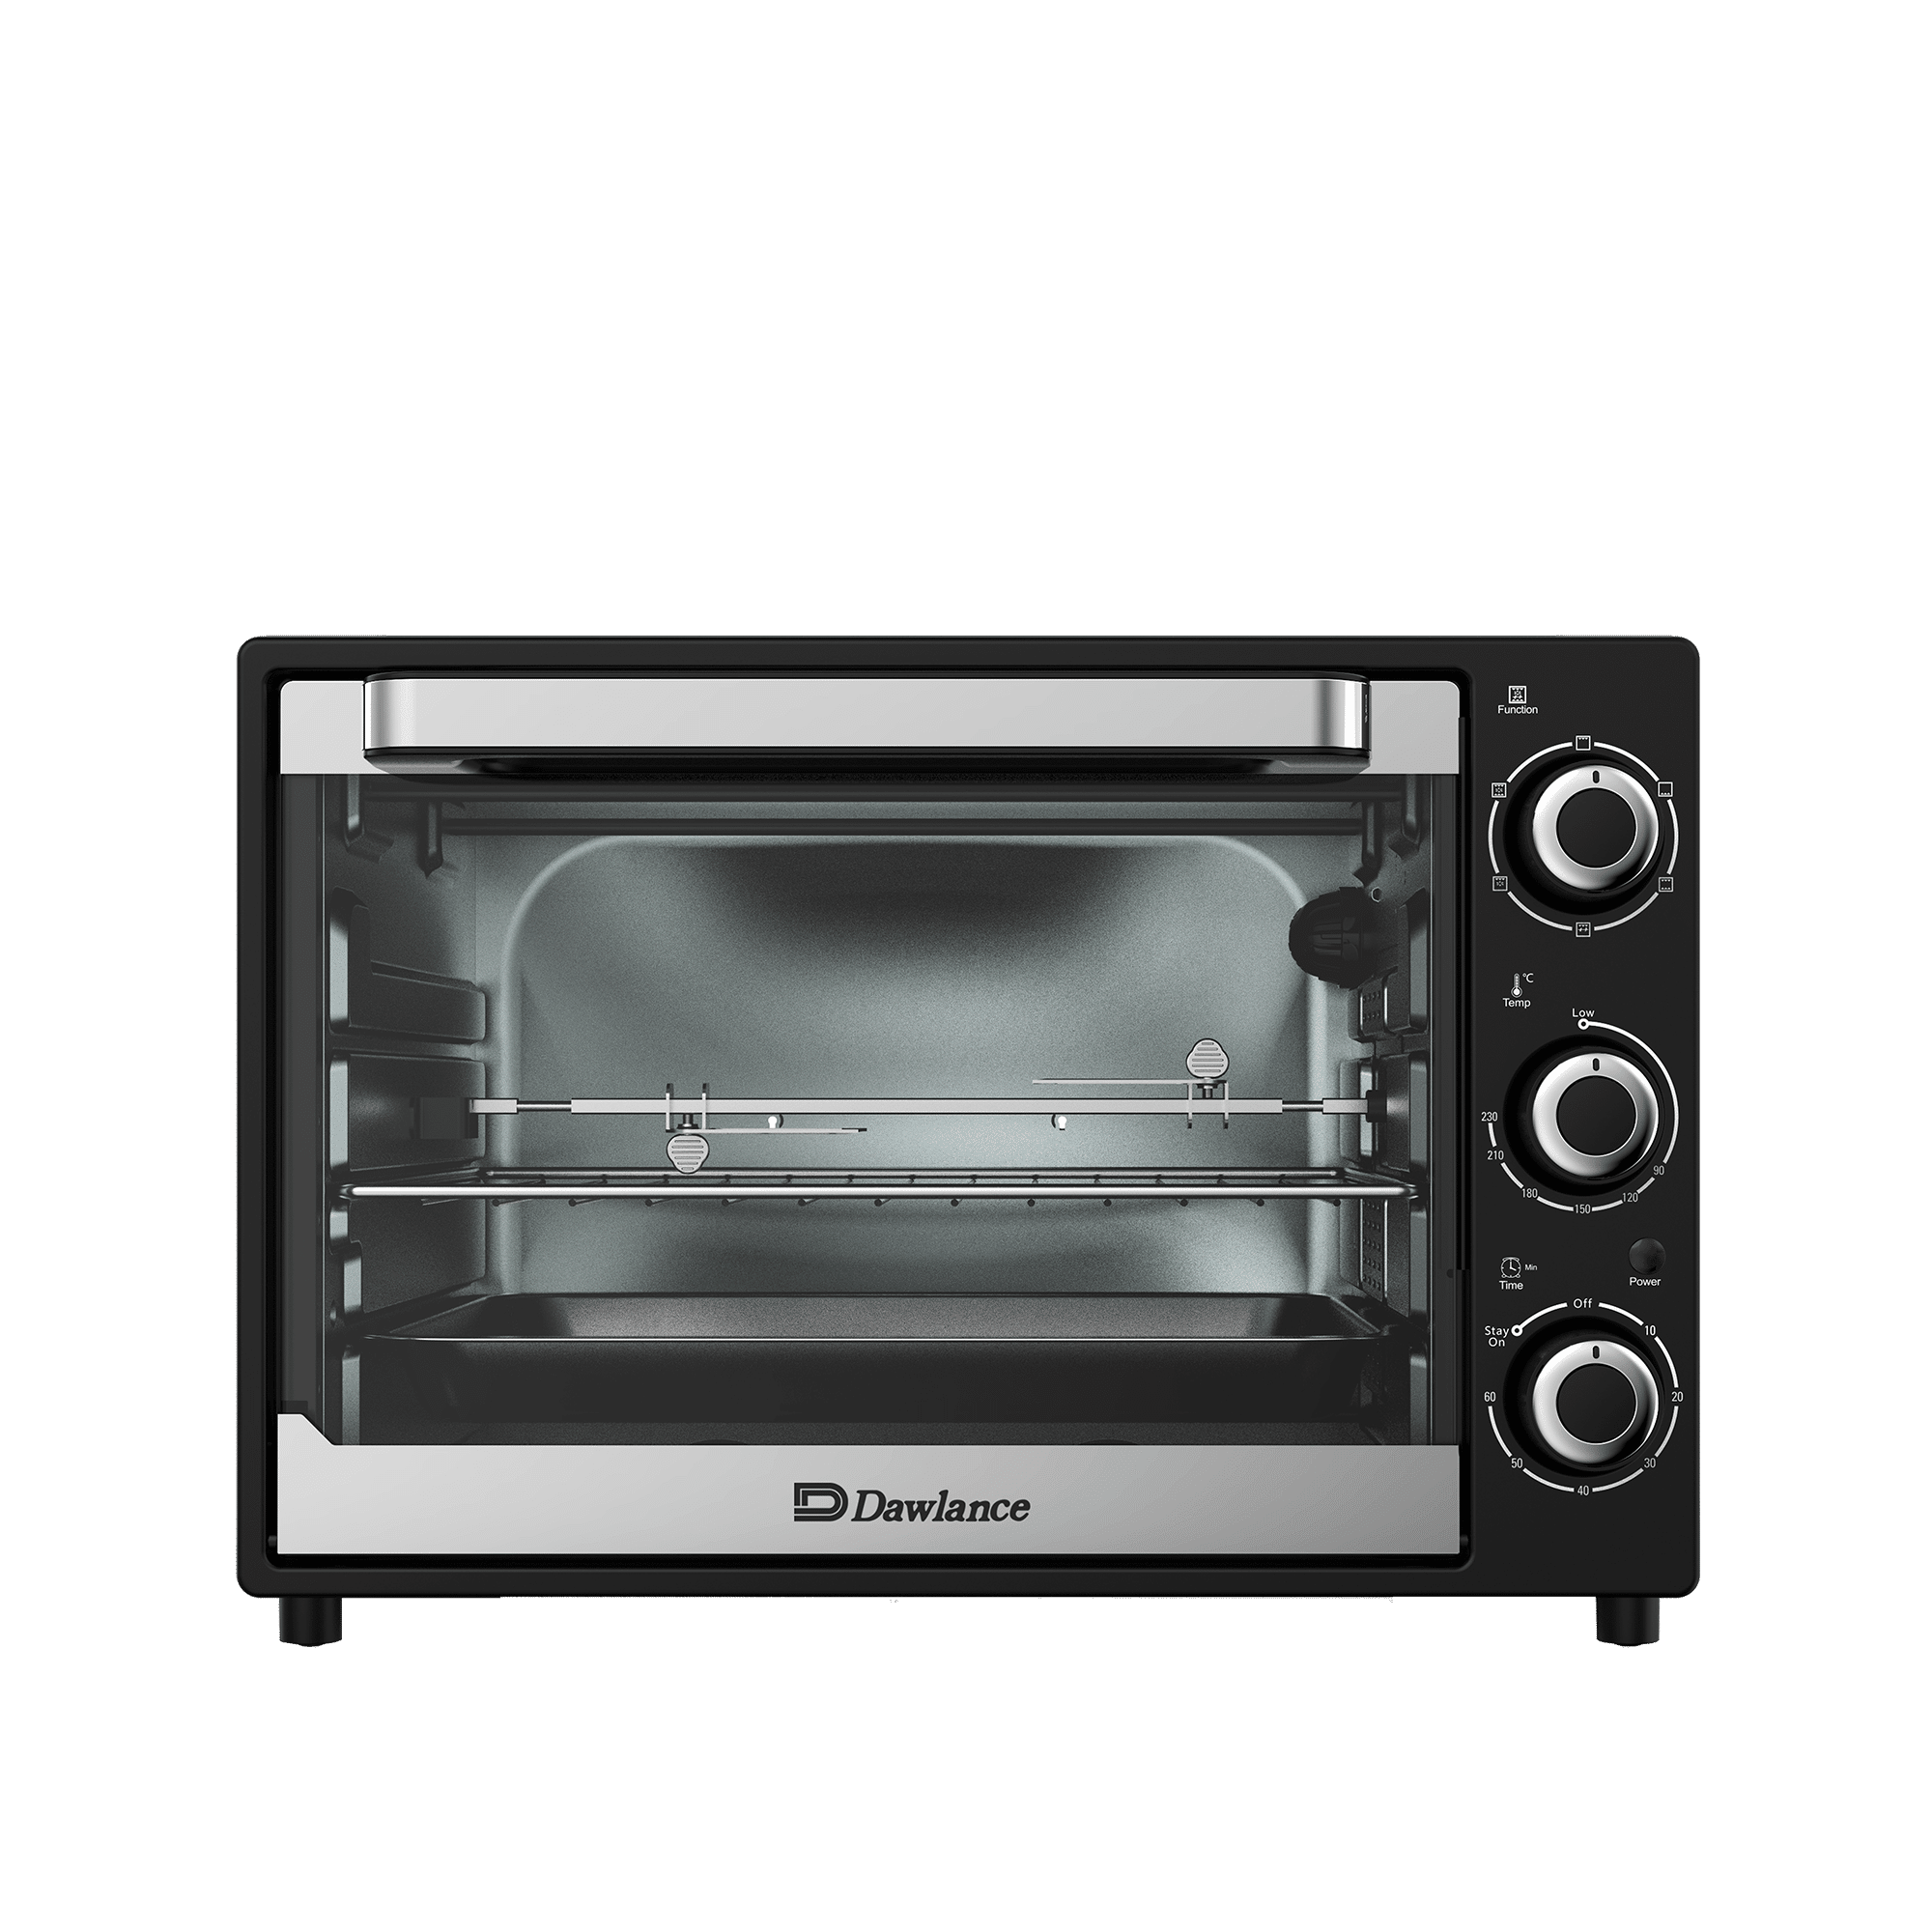 23 Liter Electric Oven / Baking Oven